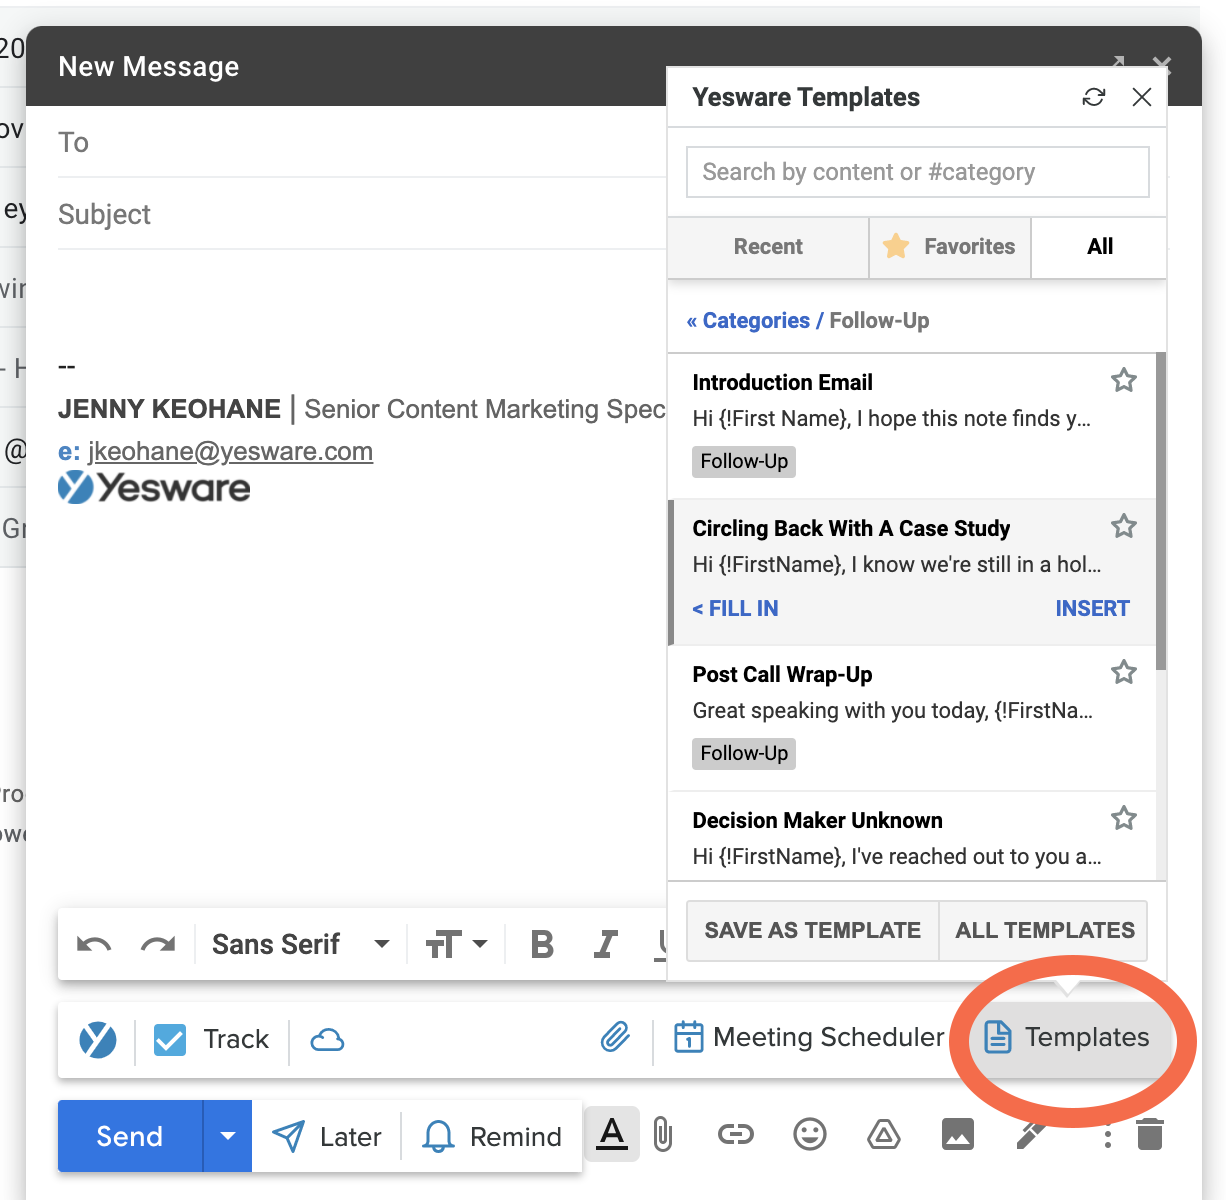 Gmail Automation: Yesware Templates